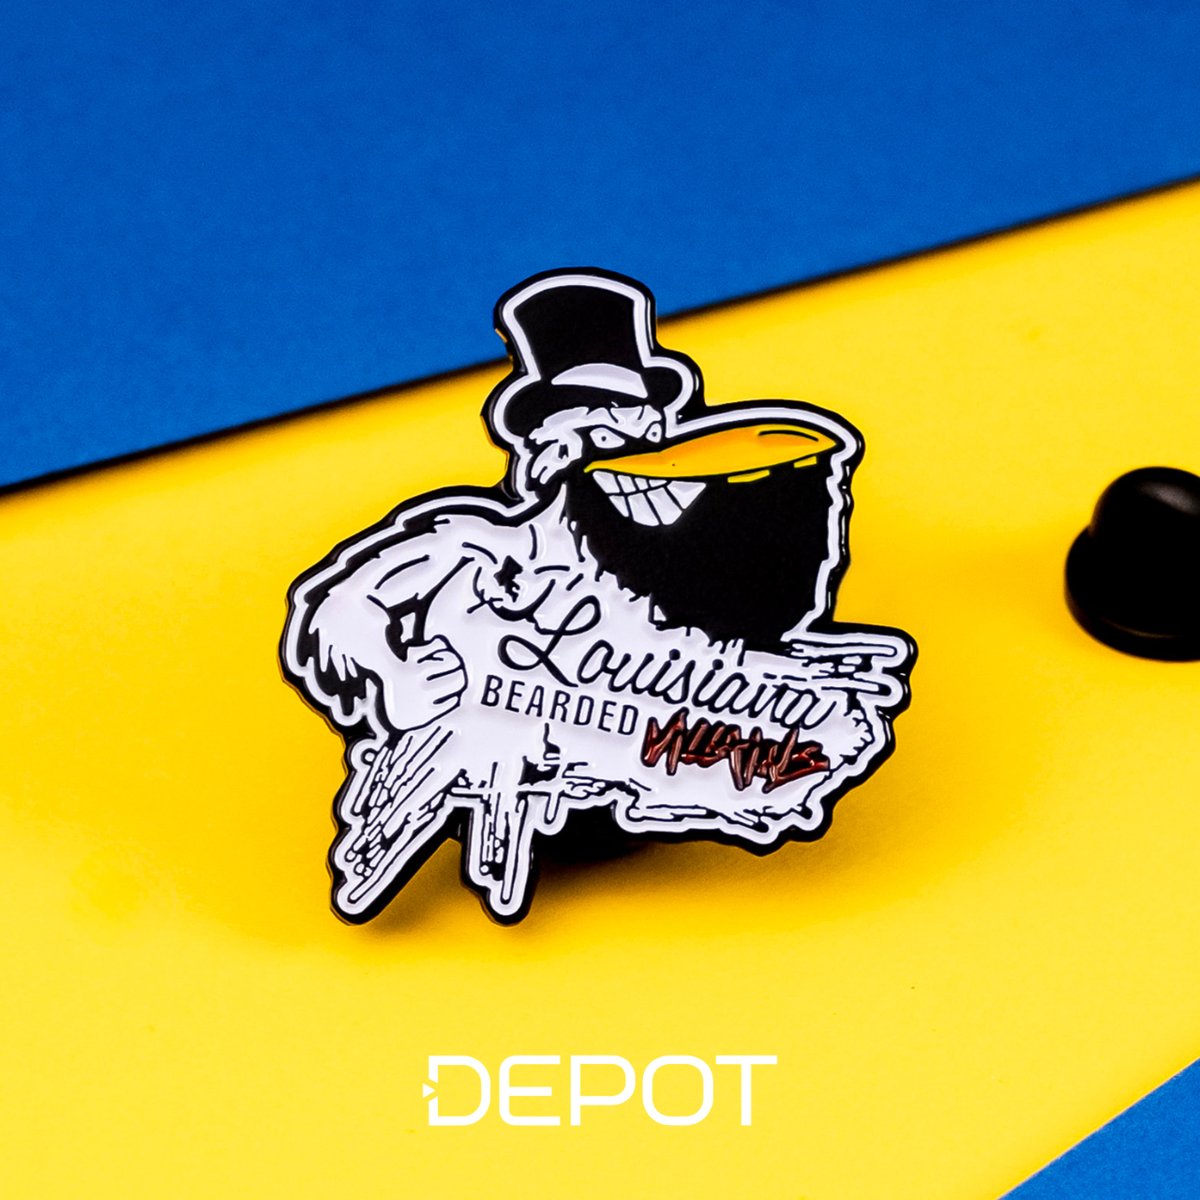 Create your own custom logo pins that stand out from the crowd! Add a unique touch to your brand with these custom pins that are sure to catch everyone's attention.
.
.
.
#pindepot #pingame #enamelpins #lapelpins #pins #enamelpin #pinstagram #pingamestrong #lapelpin